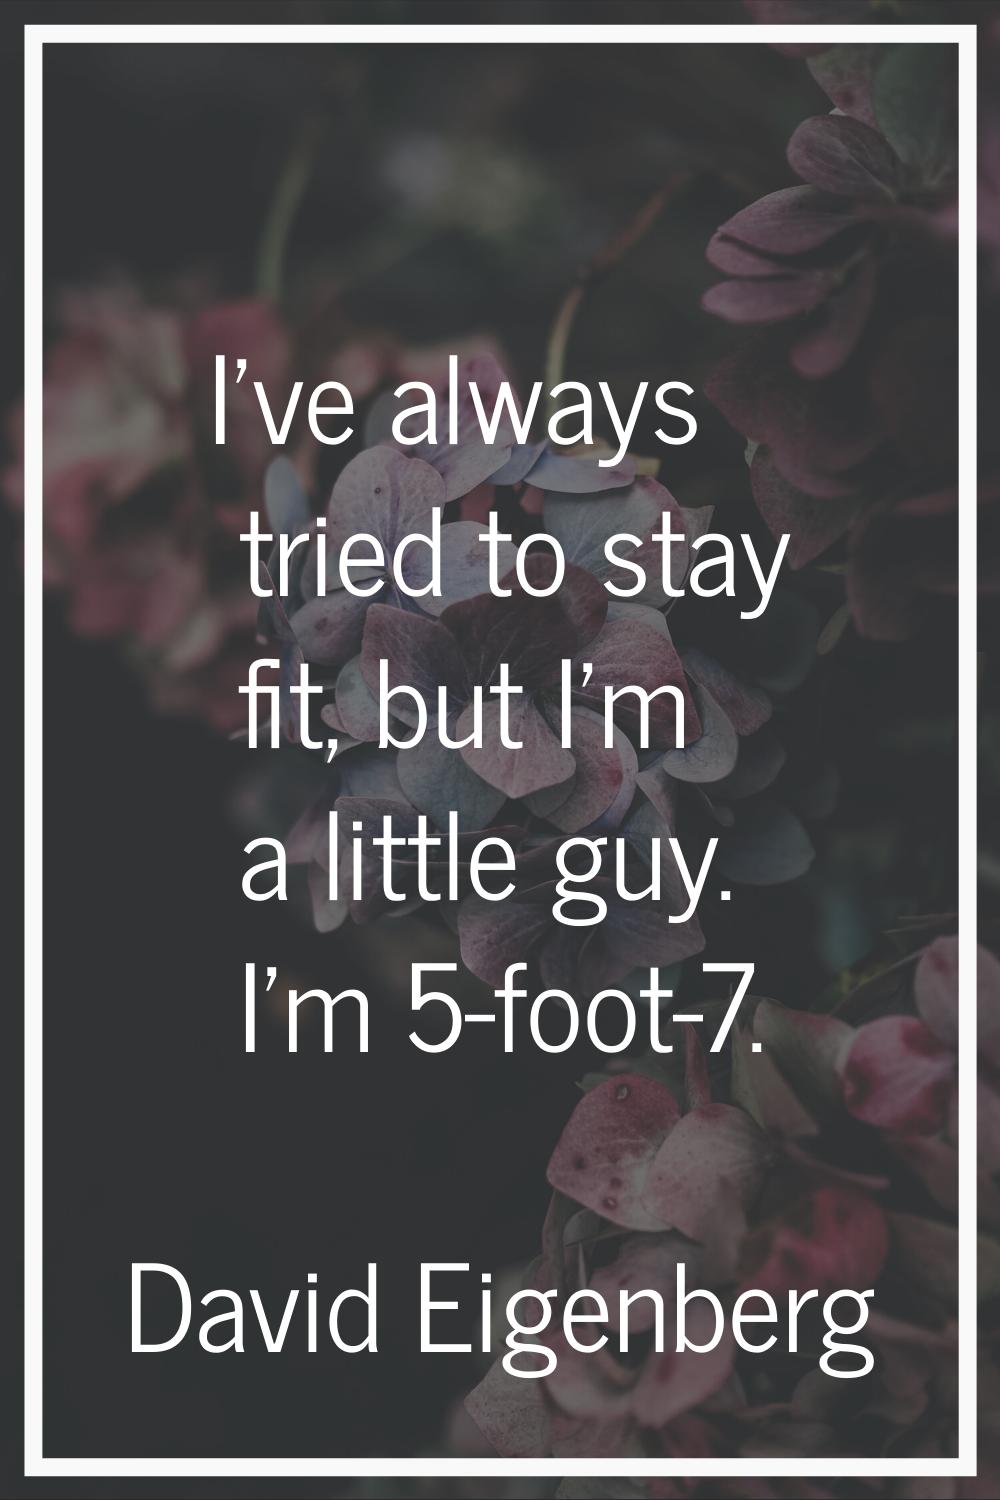 I've always tried to stay fit, but I'm a little guy. I'm 5-foot-7.